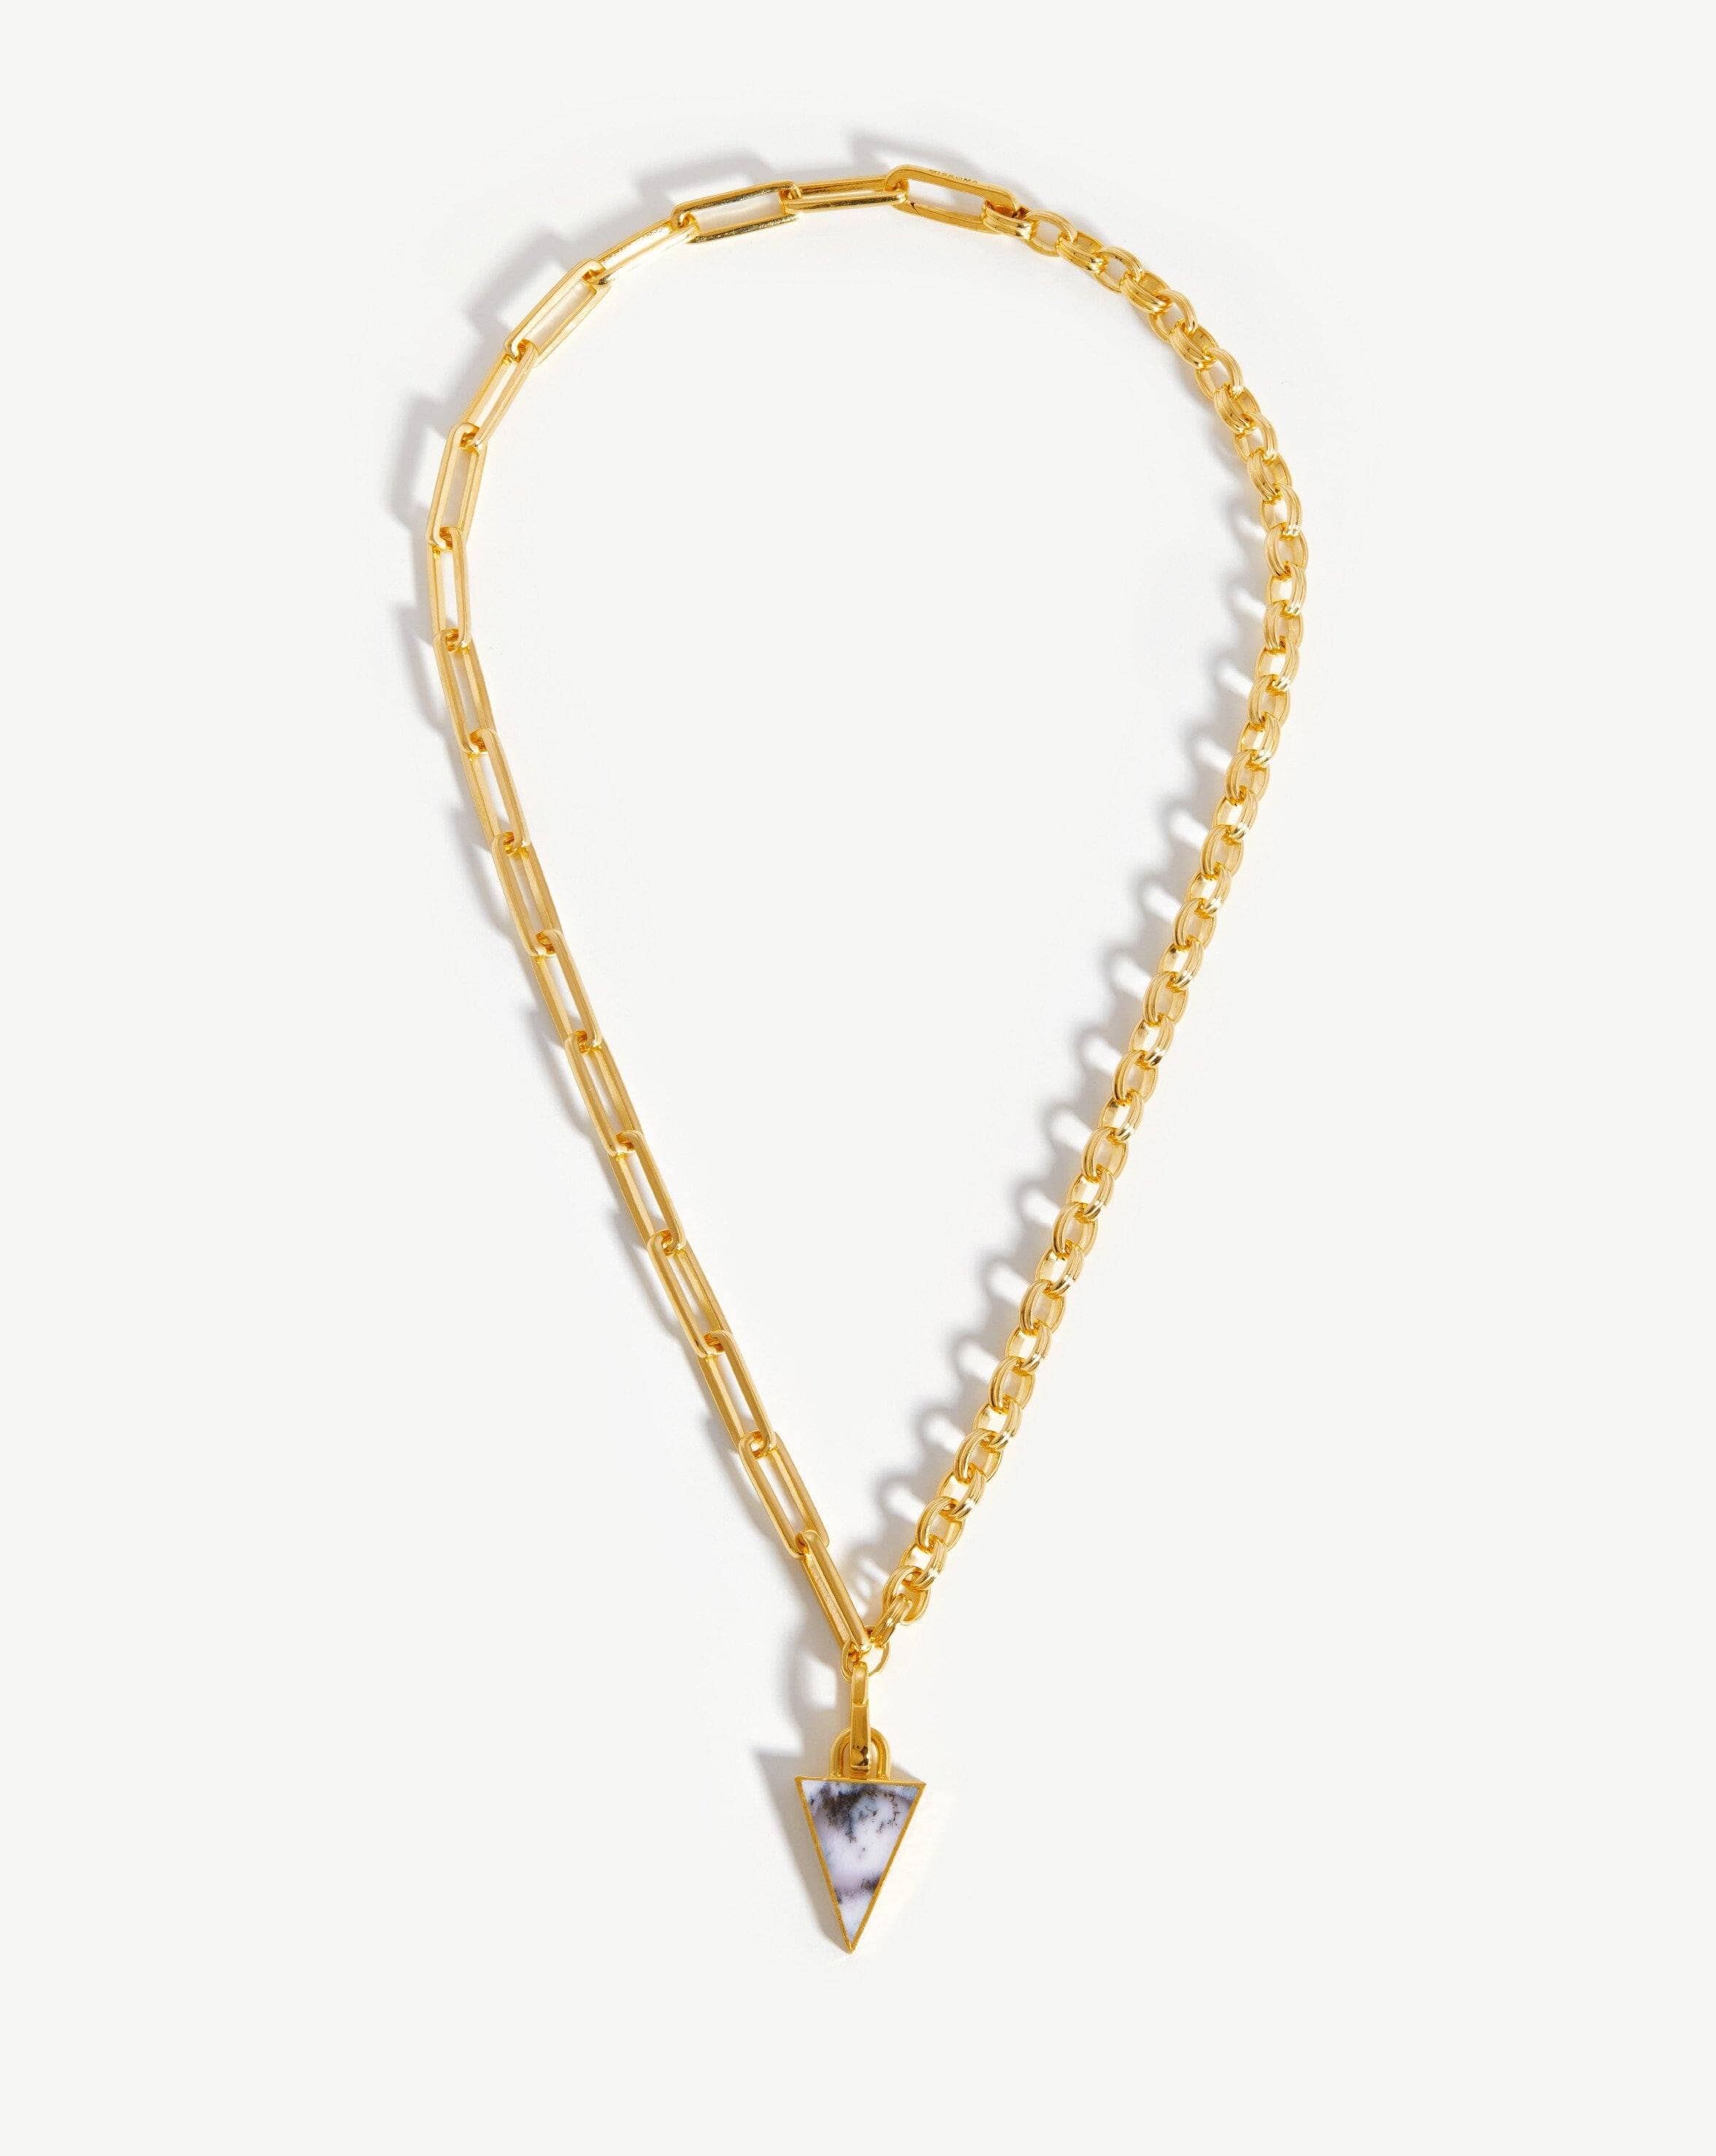 Deconstructed Axiom Triangle Chain Necklace | 18ct Gold Plated/Dendritic Necklaces Missoma 